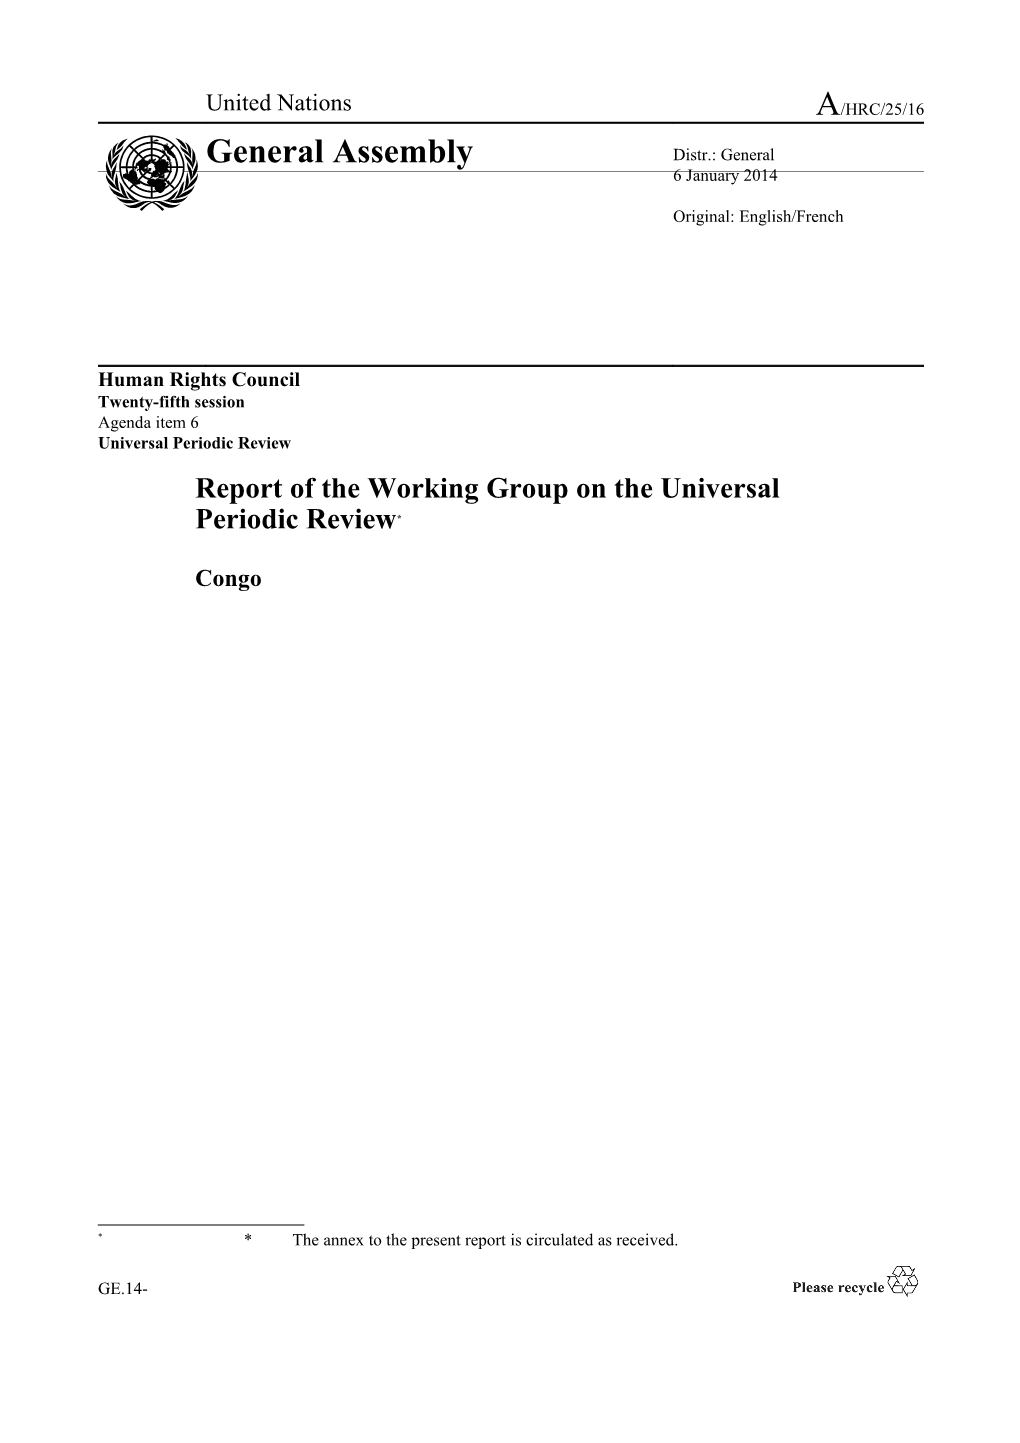 Report of the Working Group on the Universal Periodic Review - Congo in English